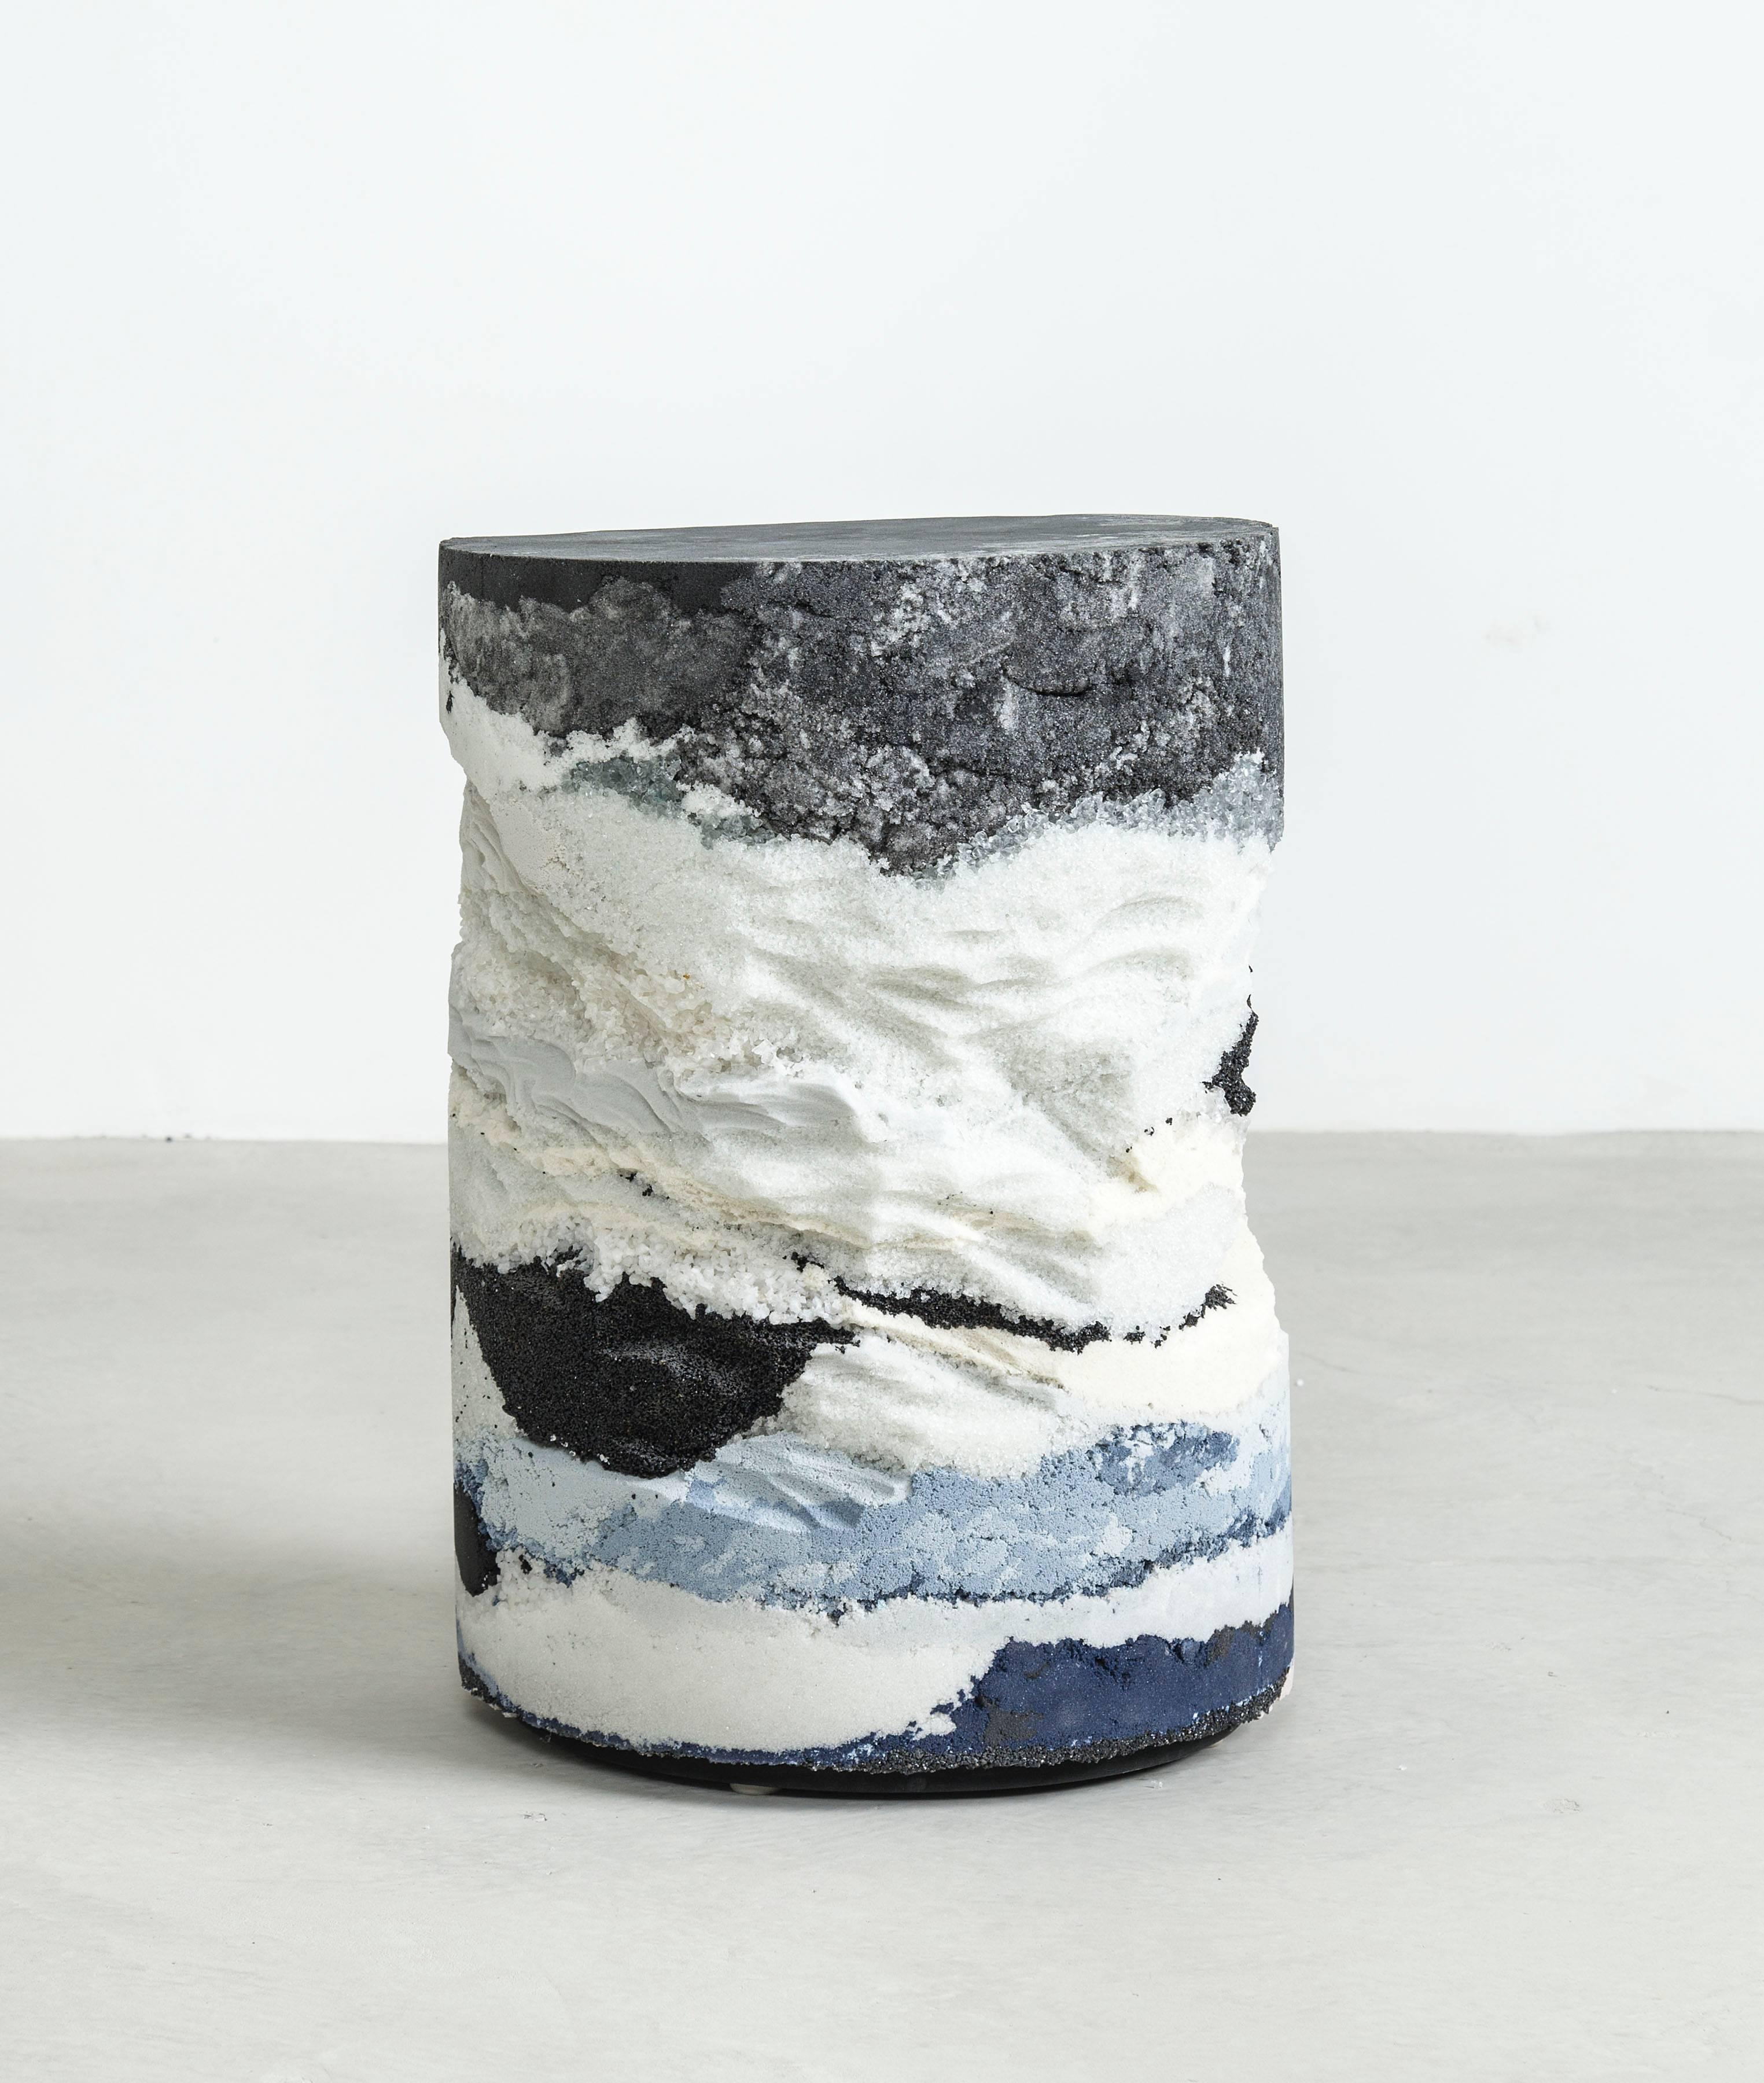 Inspired by the layers of the earth, the made-to-order drum is solid and cast from hand-dyed black silica, crushed glass, powdered glass, crystal quartz and sand. Packed in layers, the raw edges are hand-carved in natural undulations to create an